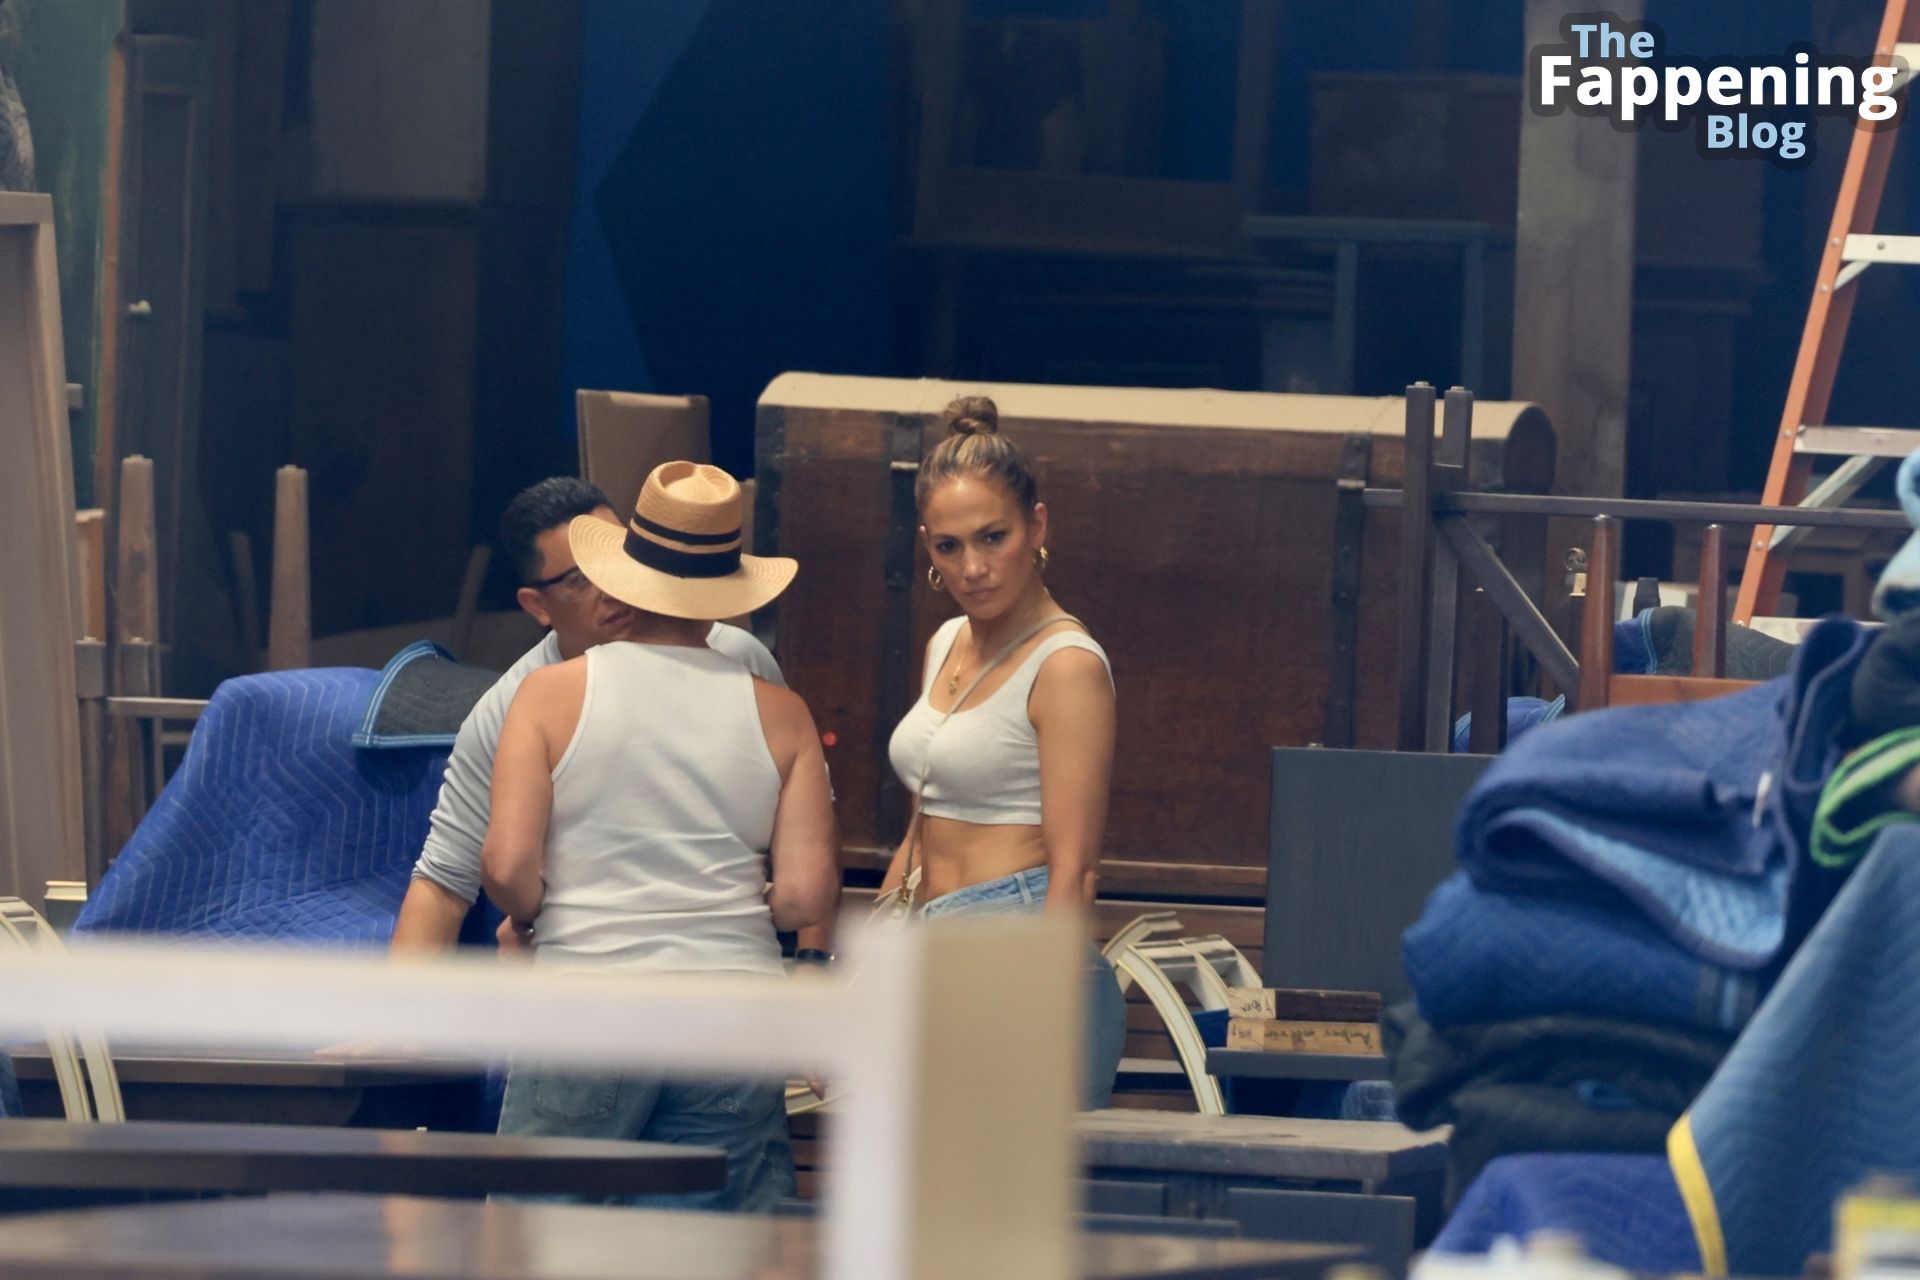 Jennifer Lopez Visits Dusty Big Daddy’s Antiques Searching For Furniture (45 Photos)